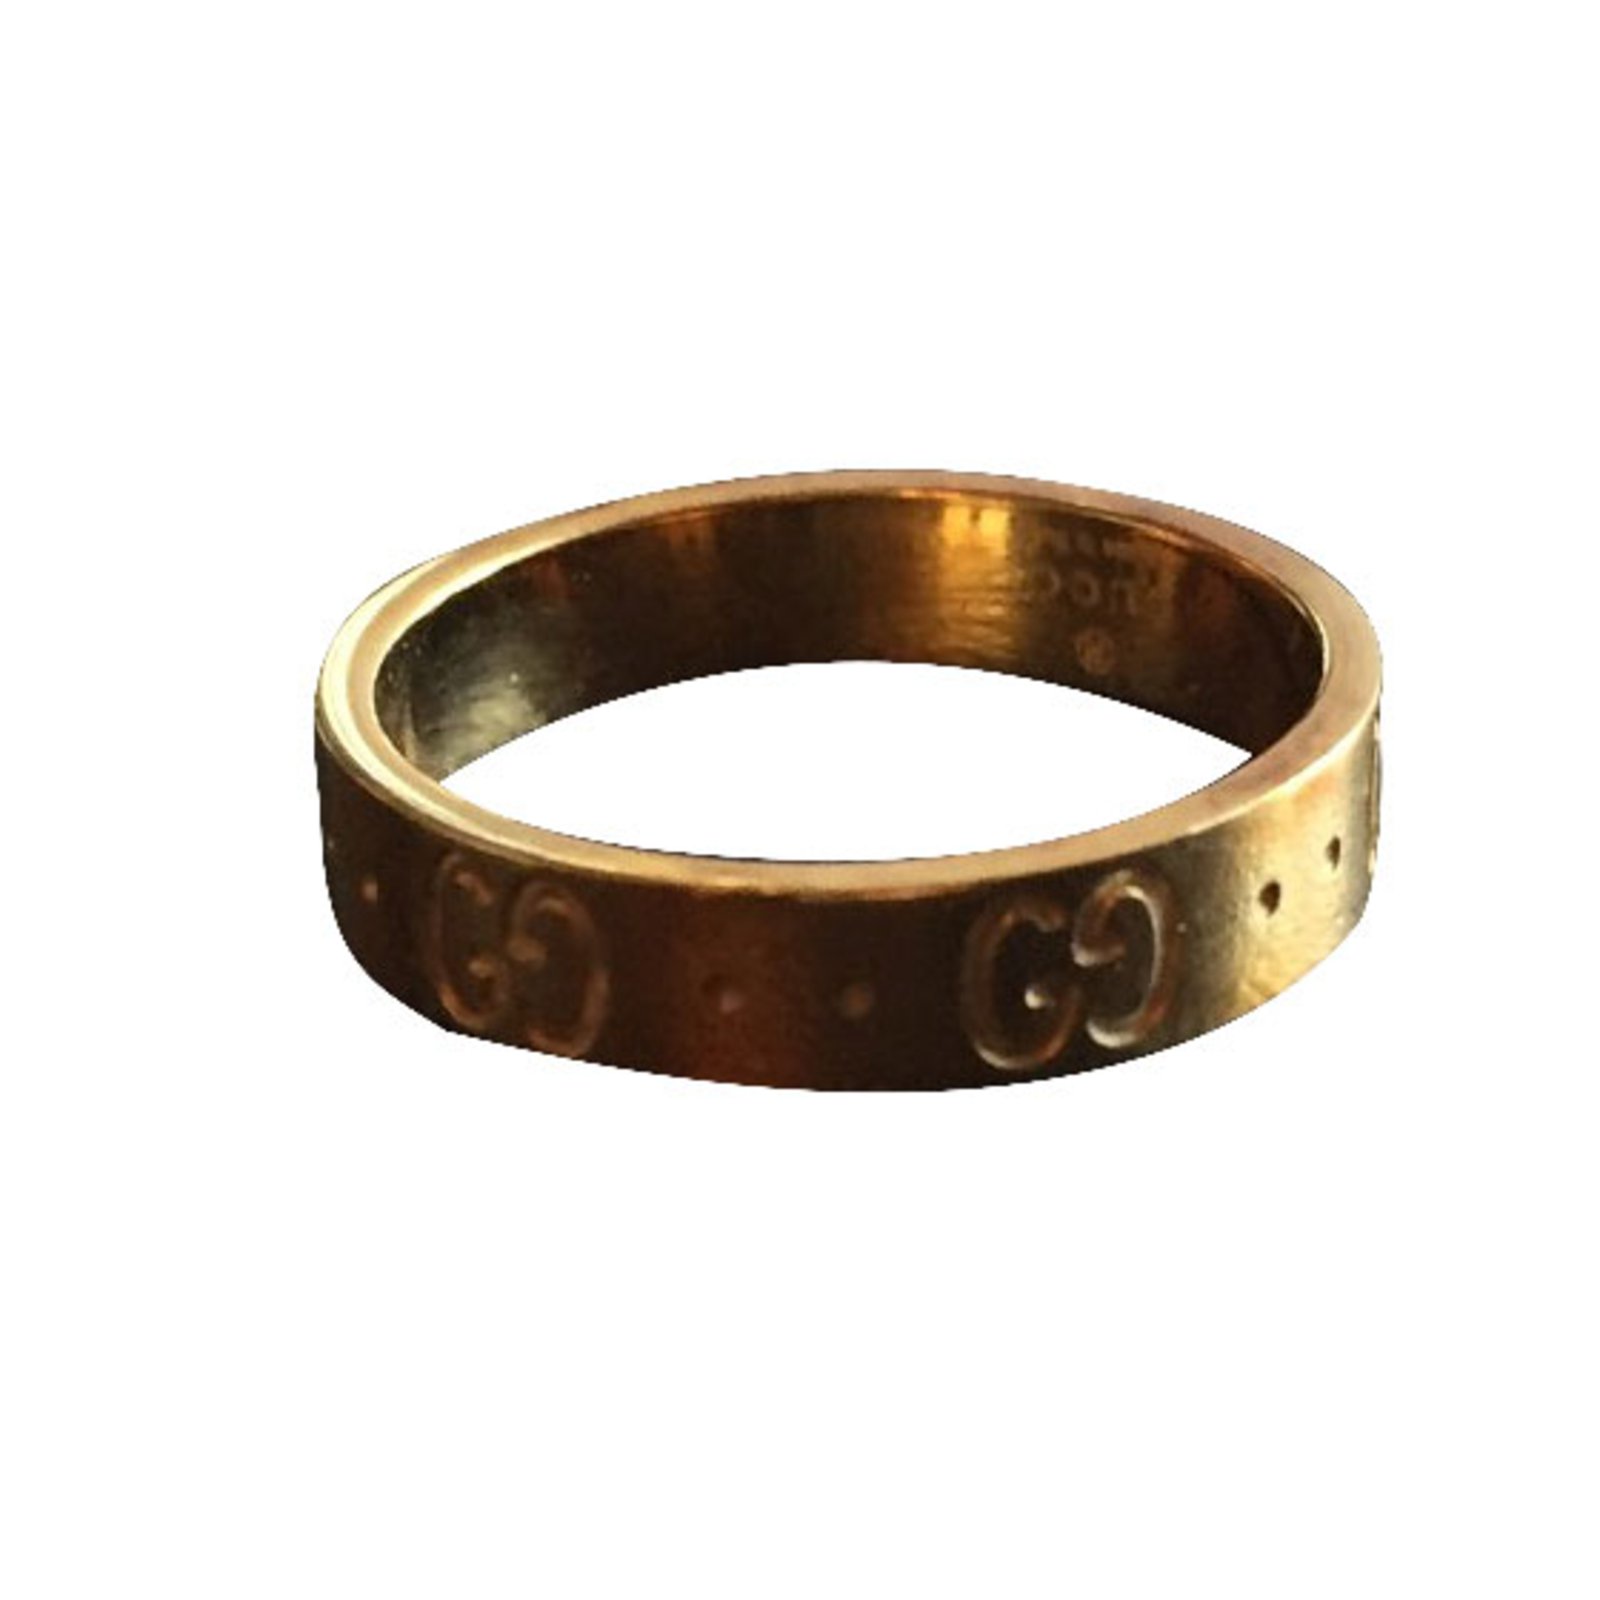 gucci icon ring gold